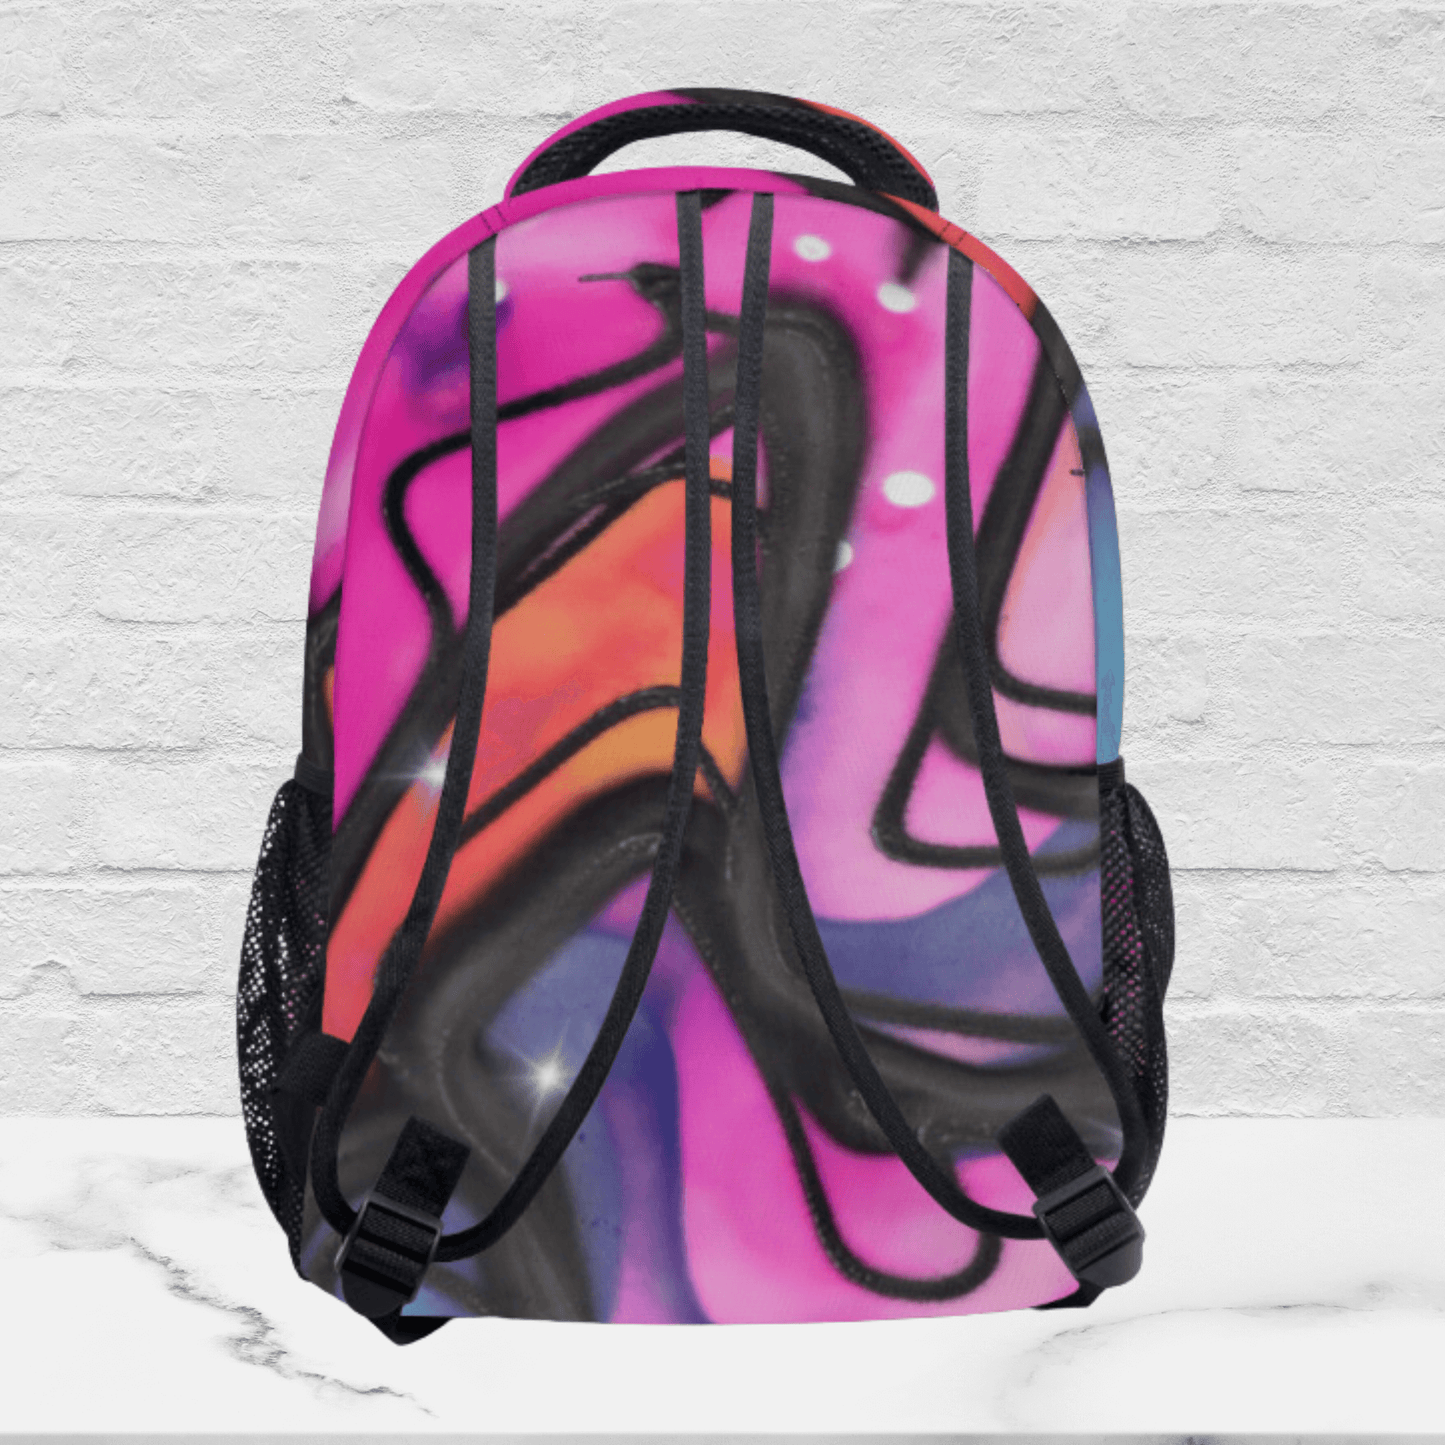 All sides of our pink backpack for kids and teens shows the colorful print on all areas of the backpack.